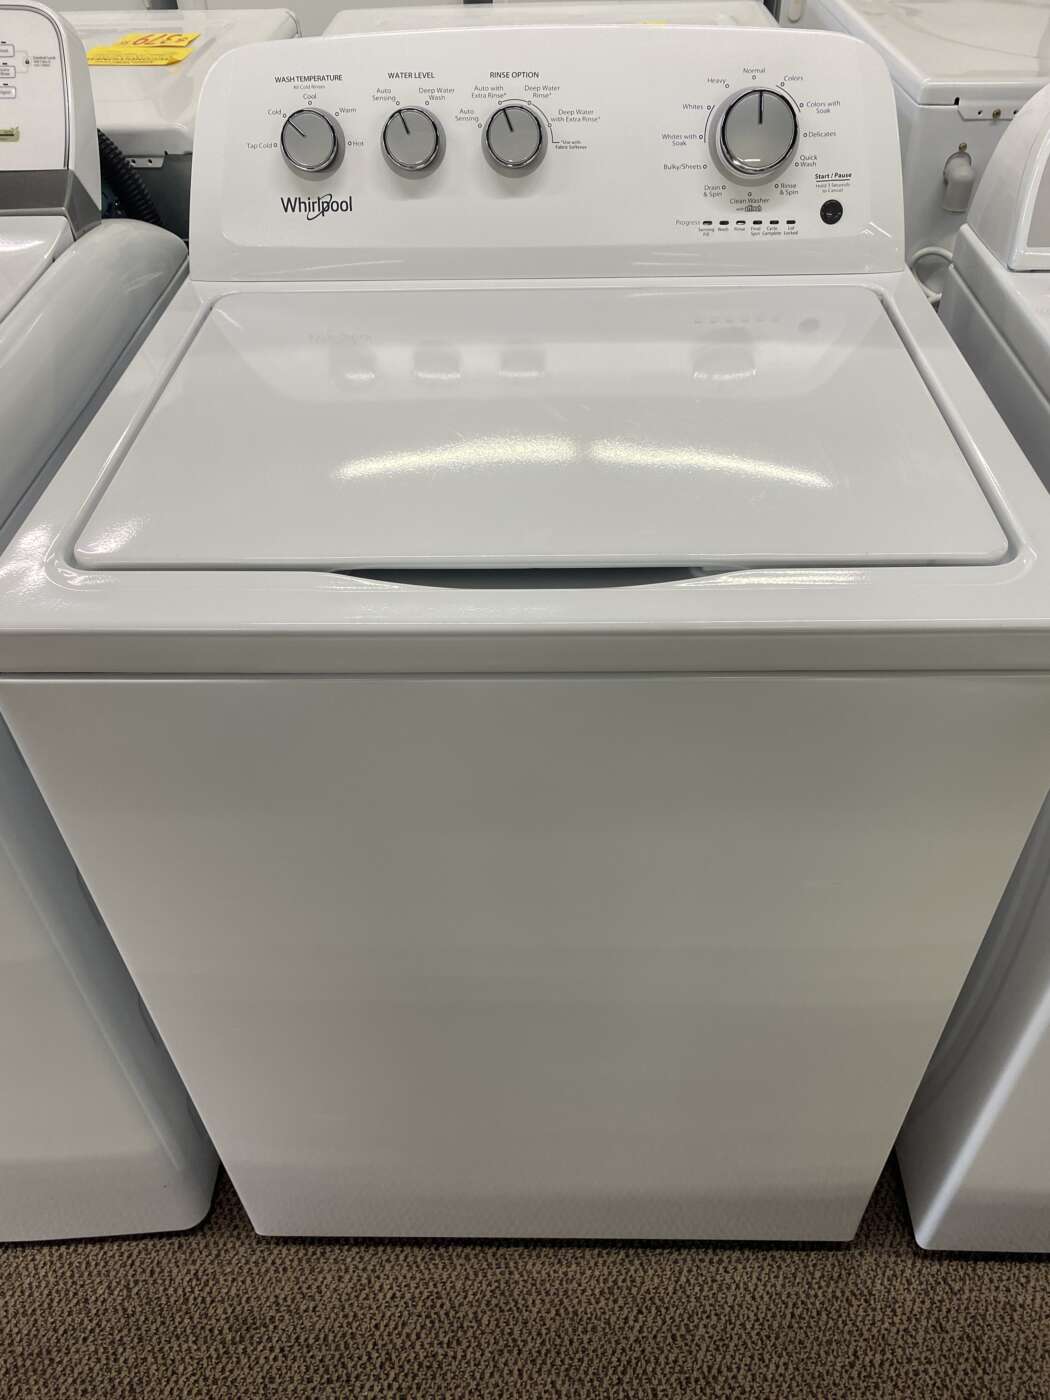 Reconditioned WHIRLPOOL 3.8 CU. FT Top-Load Washer